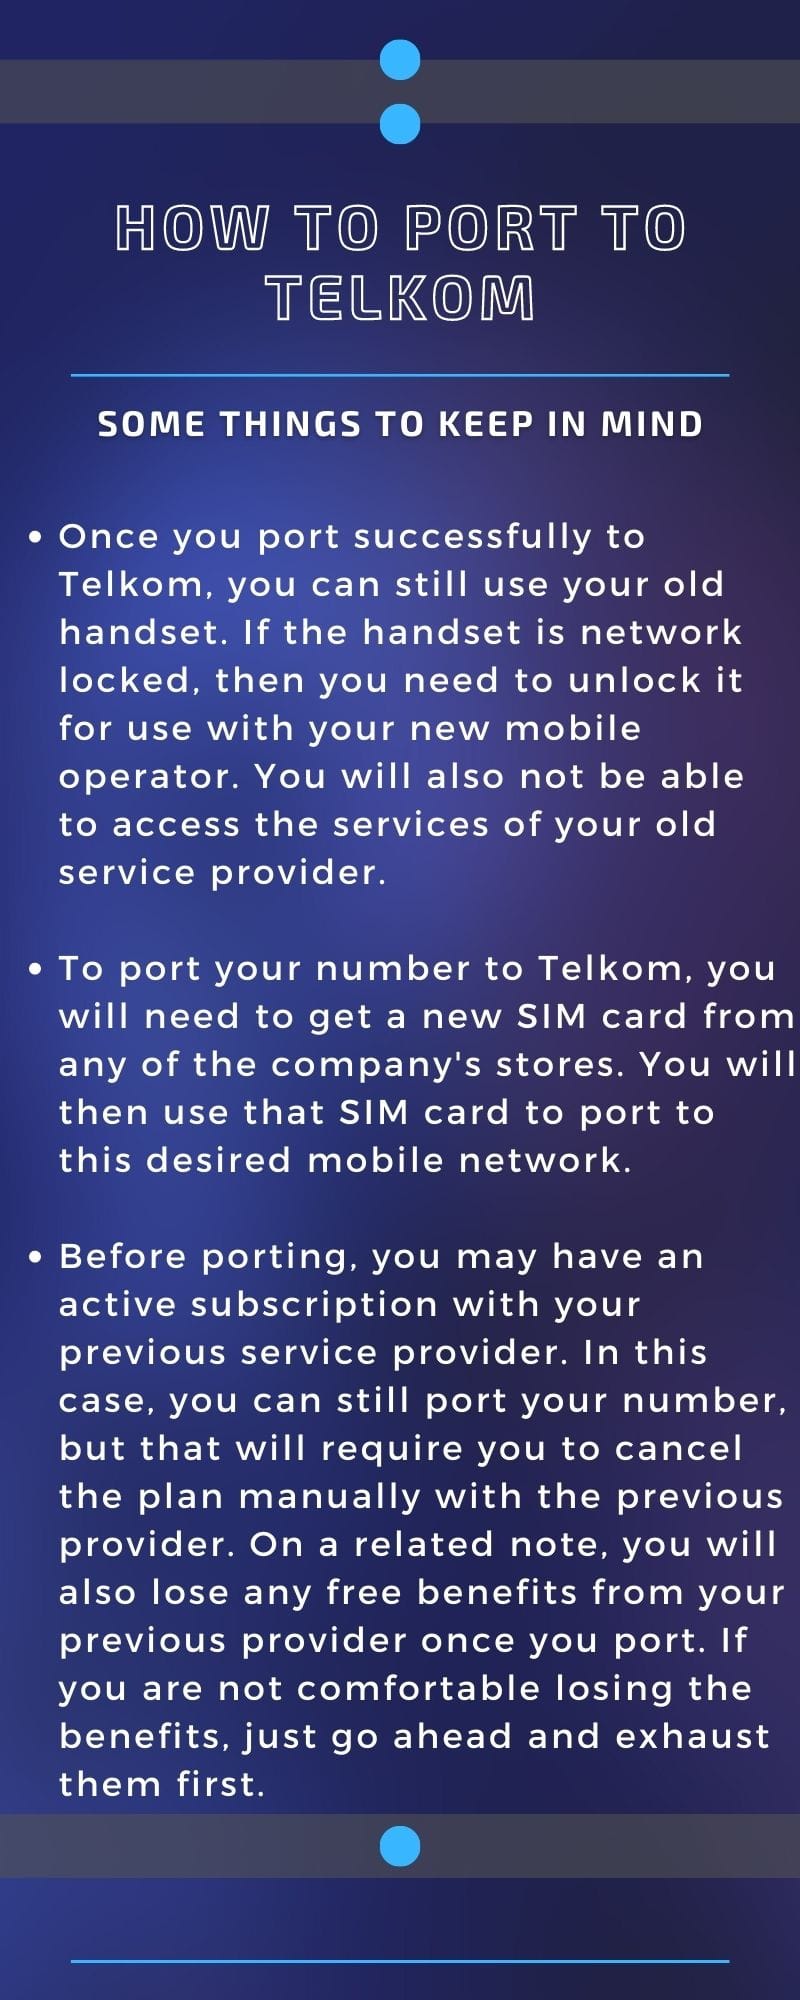 How to port to Telkom